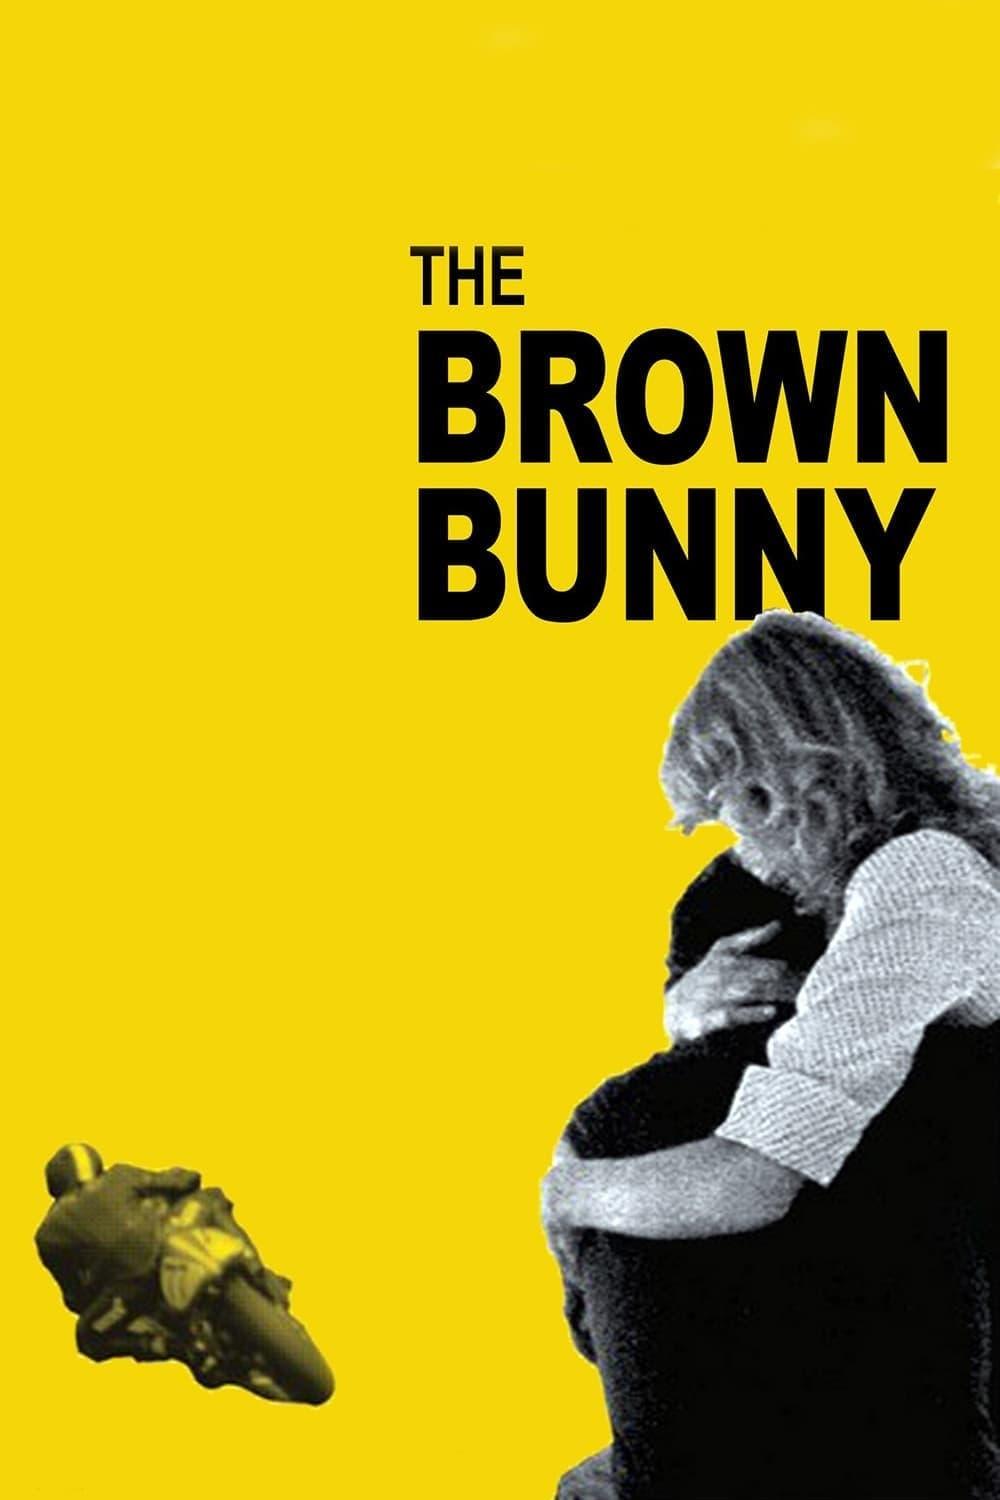 The Brown Bunny poster